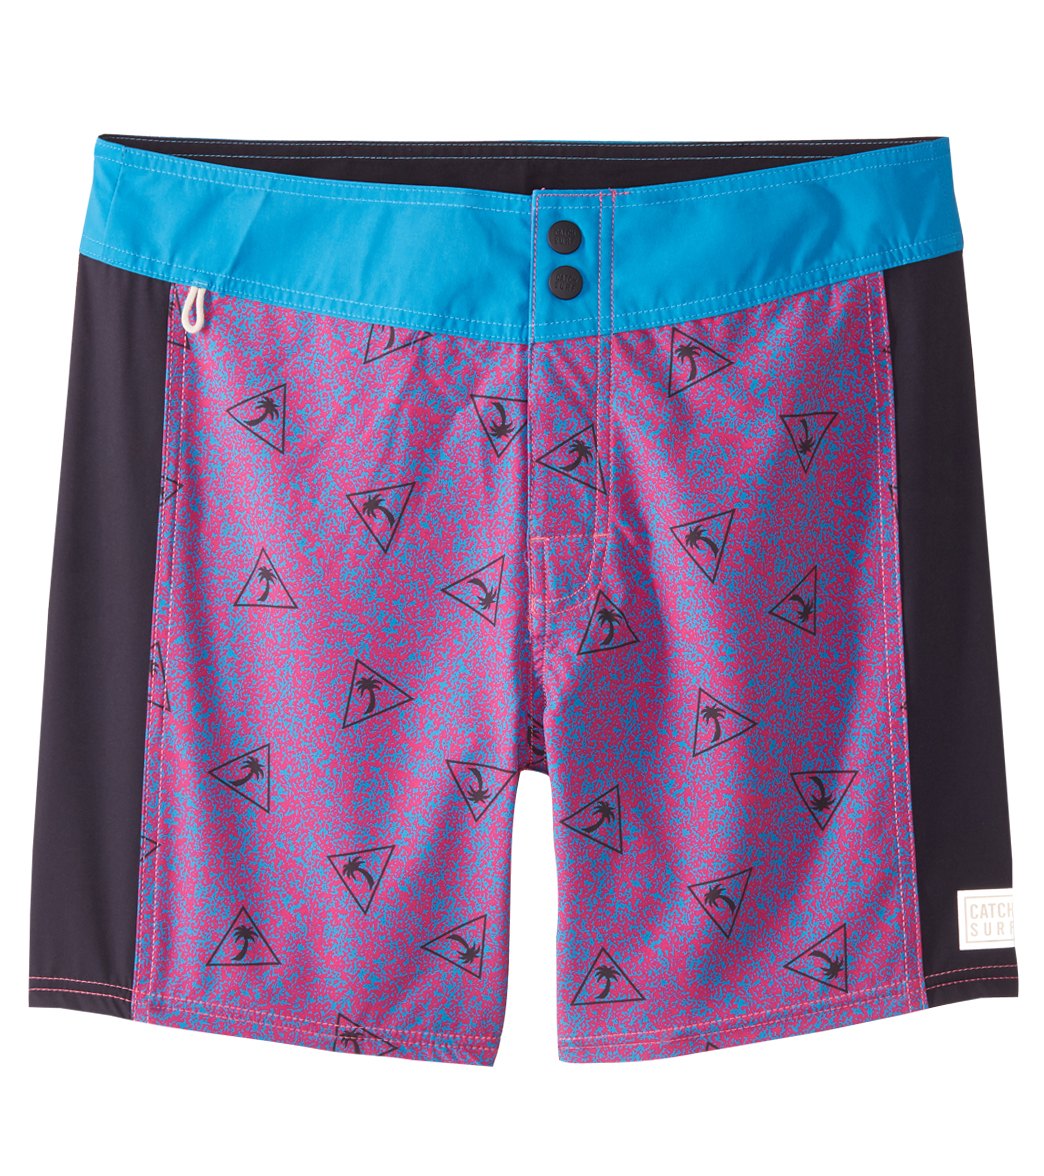 Catch Surf Men's Line Up Trunk 17 Inch - Turquoise 36 Polyester/Spandex - Swimoutlet.com